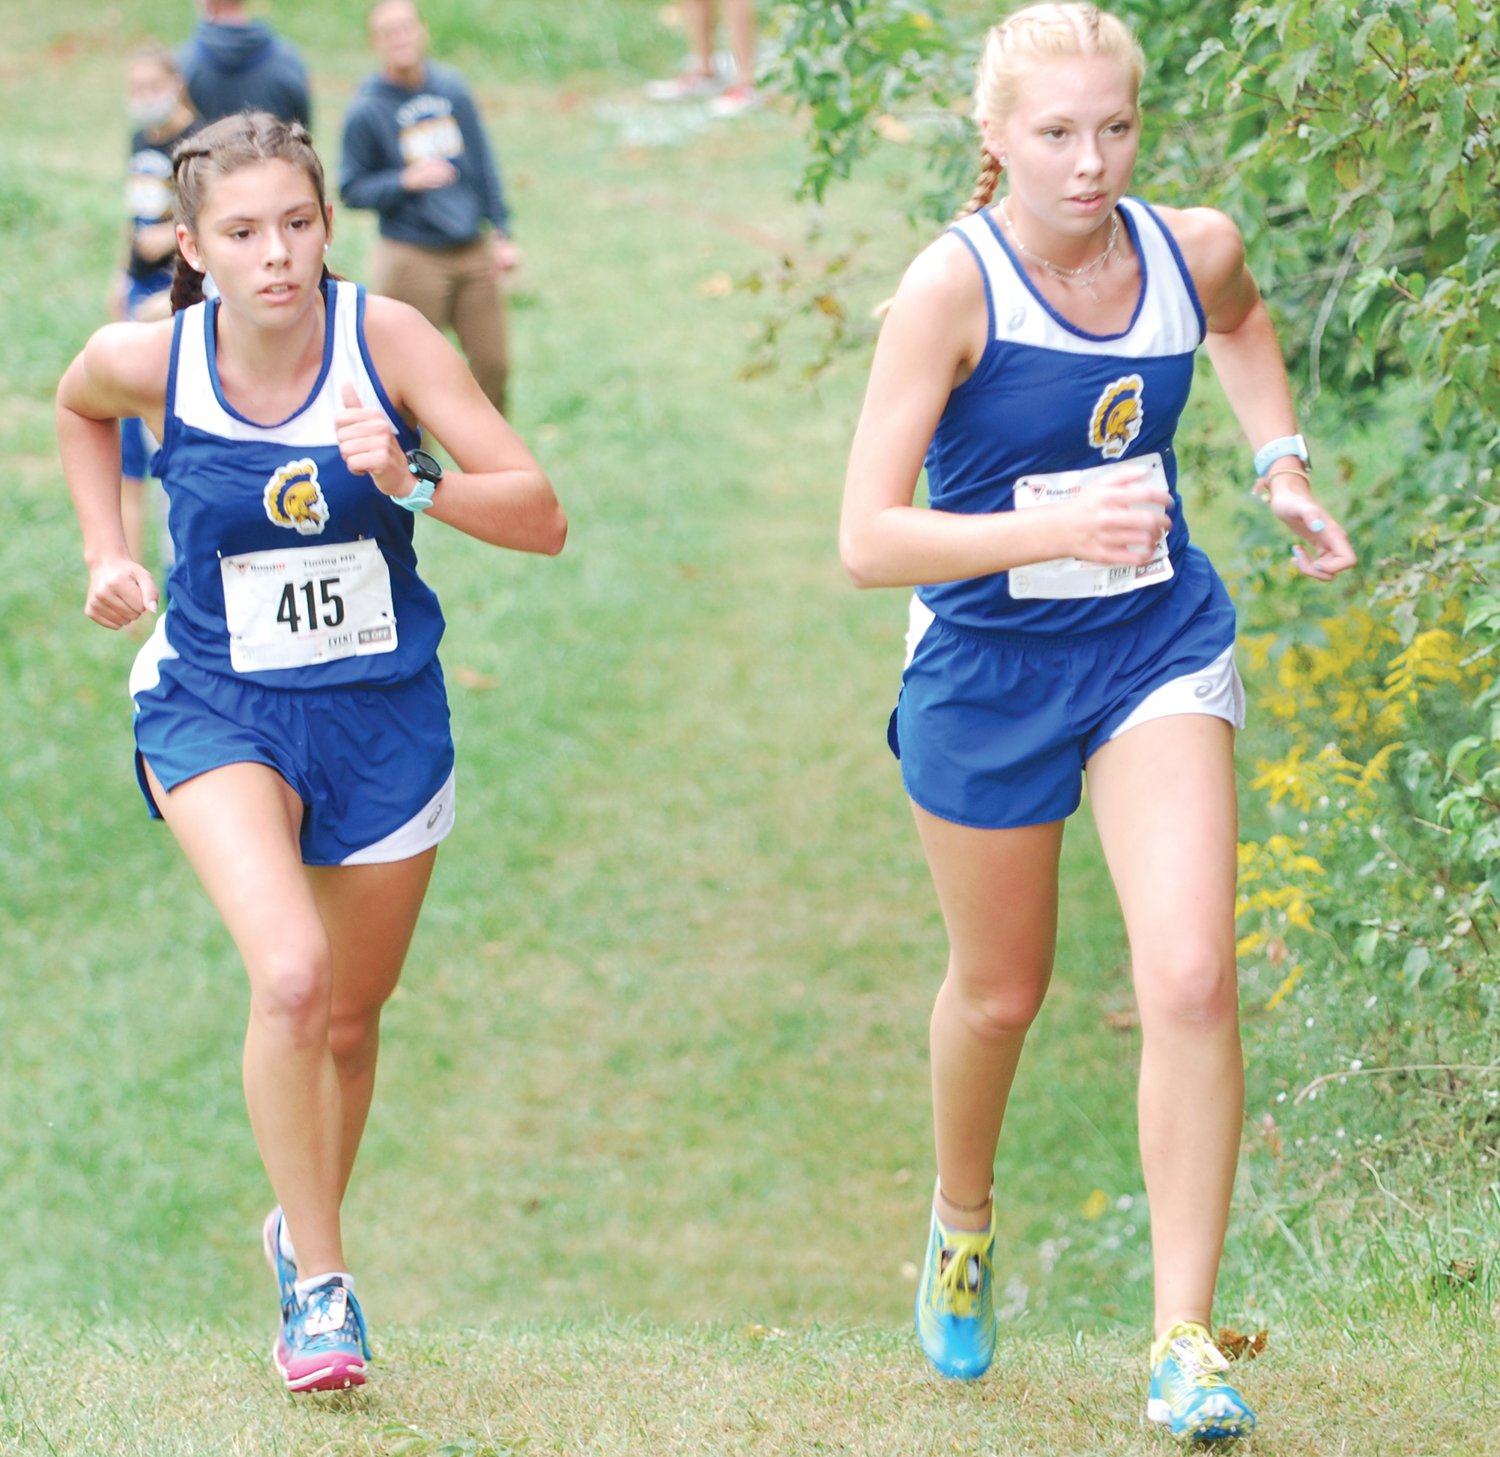 Crawfordsville's Shelby Greene and Halle Smith finished second and third respectively at the Montgomery County meet in 2020.